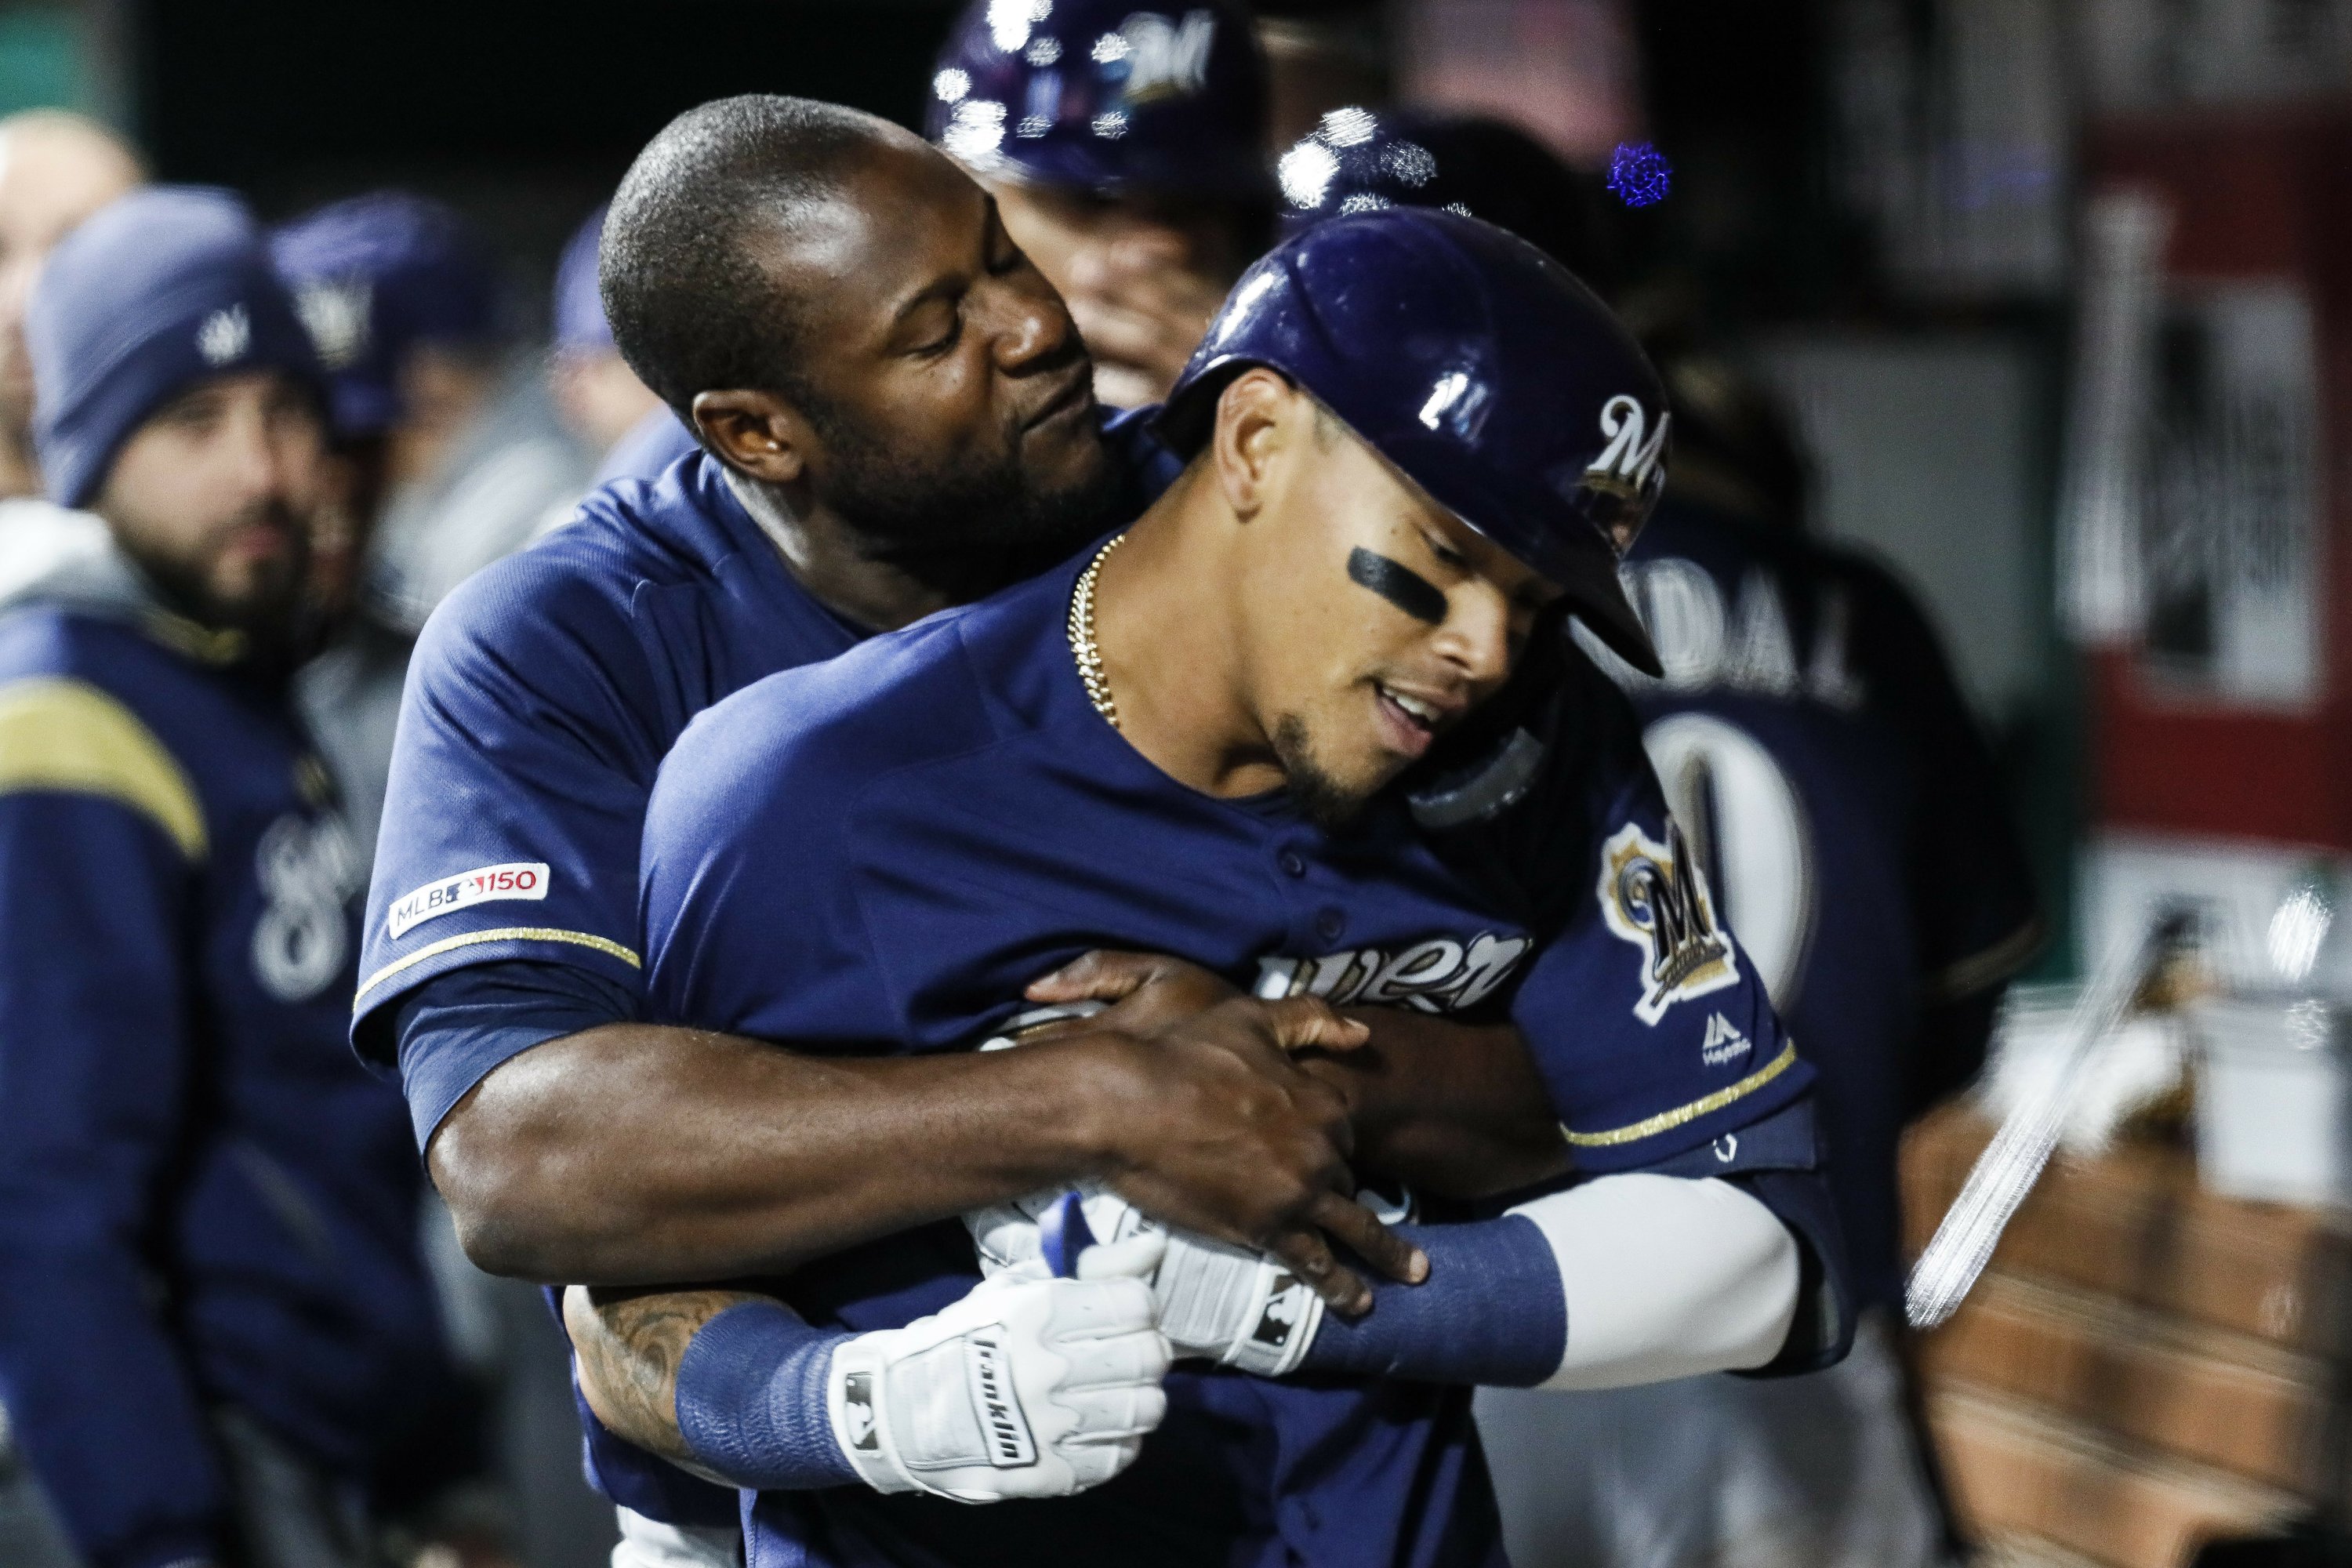 Arcia’s HR breaks slump, leads Brewers over Reds 4-3